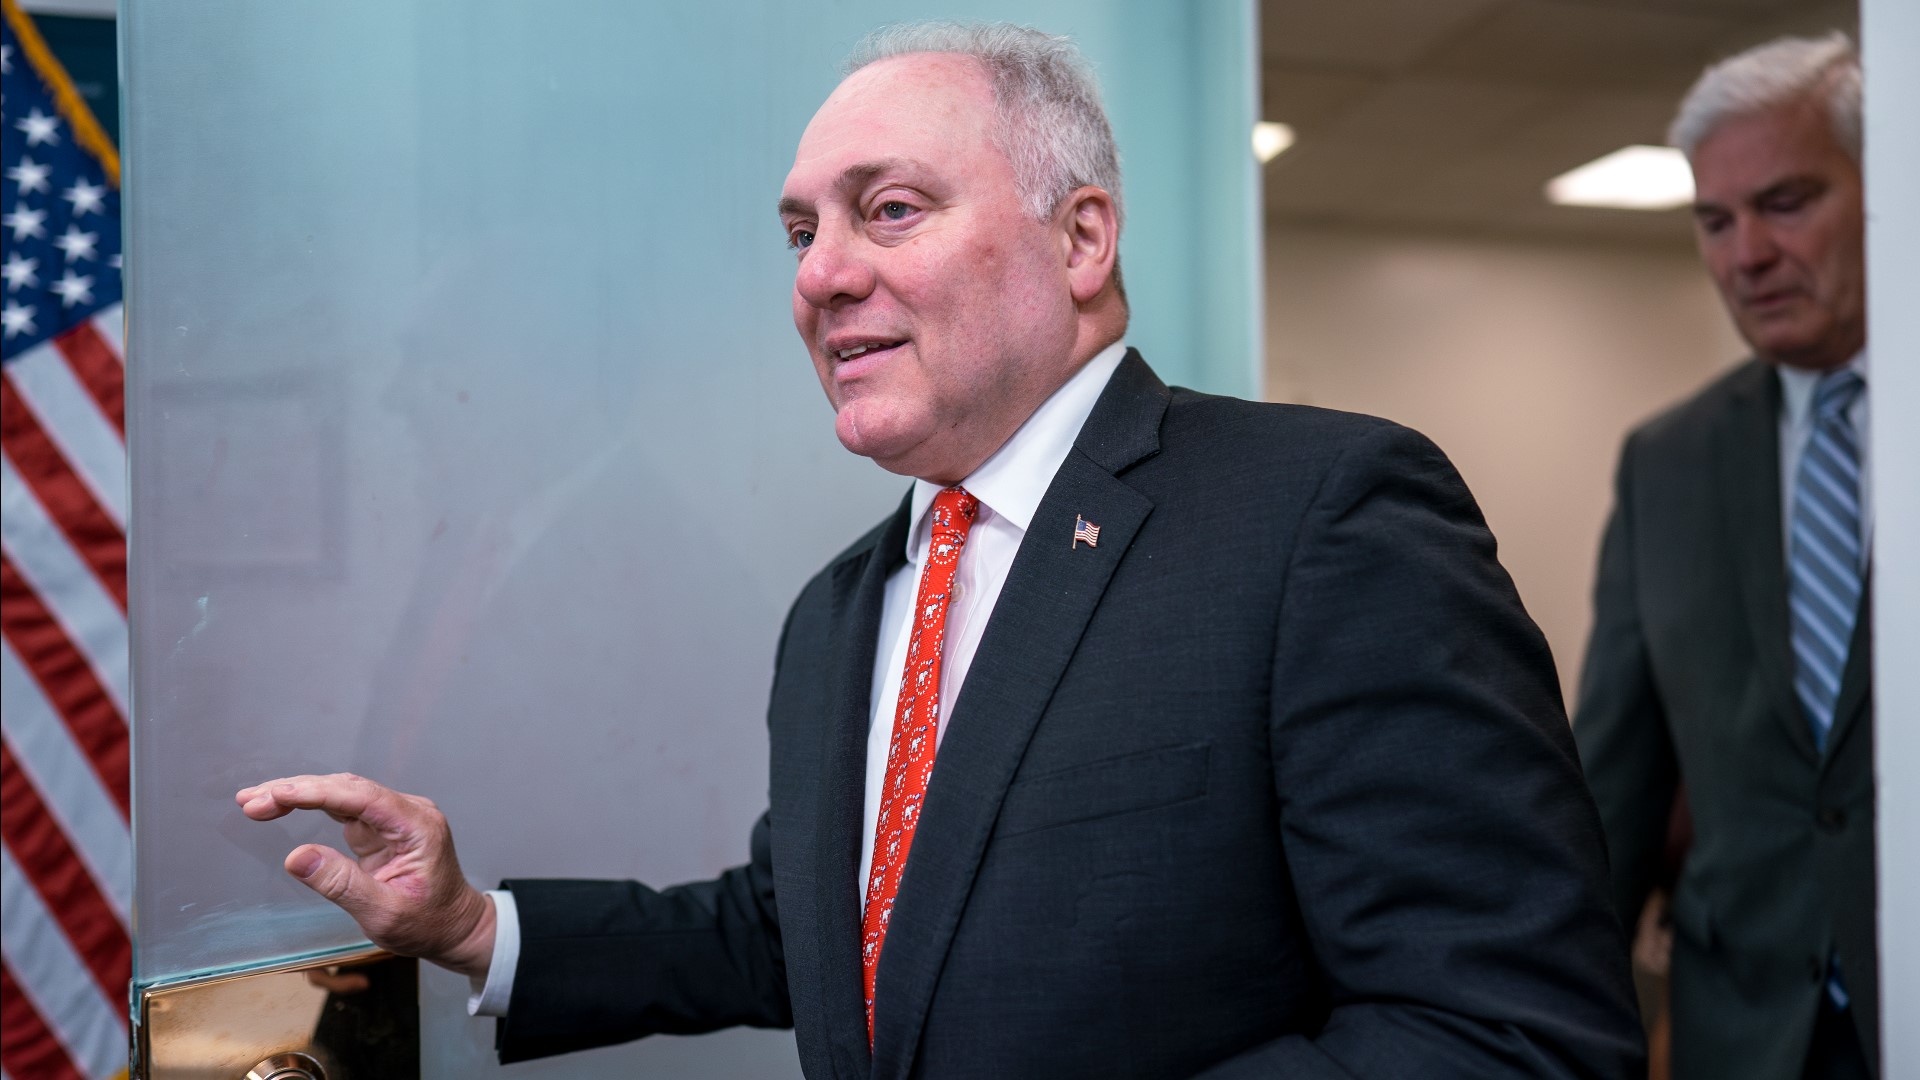 Steve Scalise spoke briefly after the GOP vote to nominate him as the next Speaker of the House.